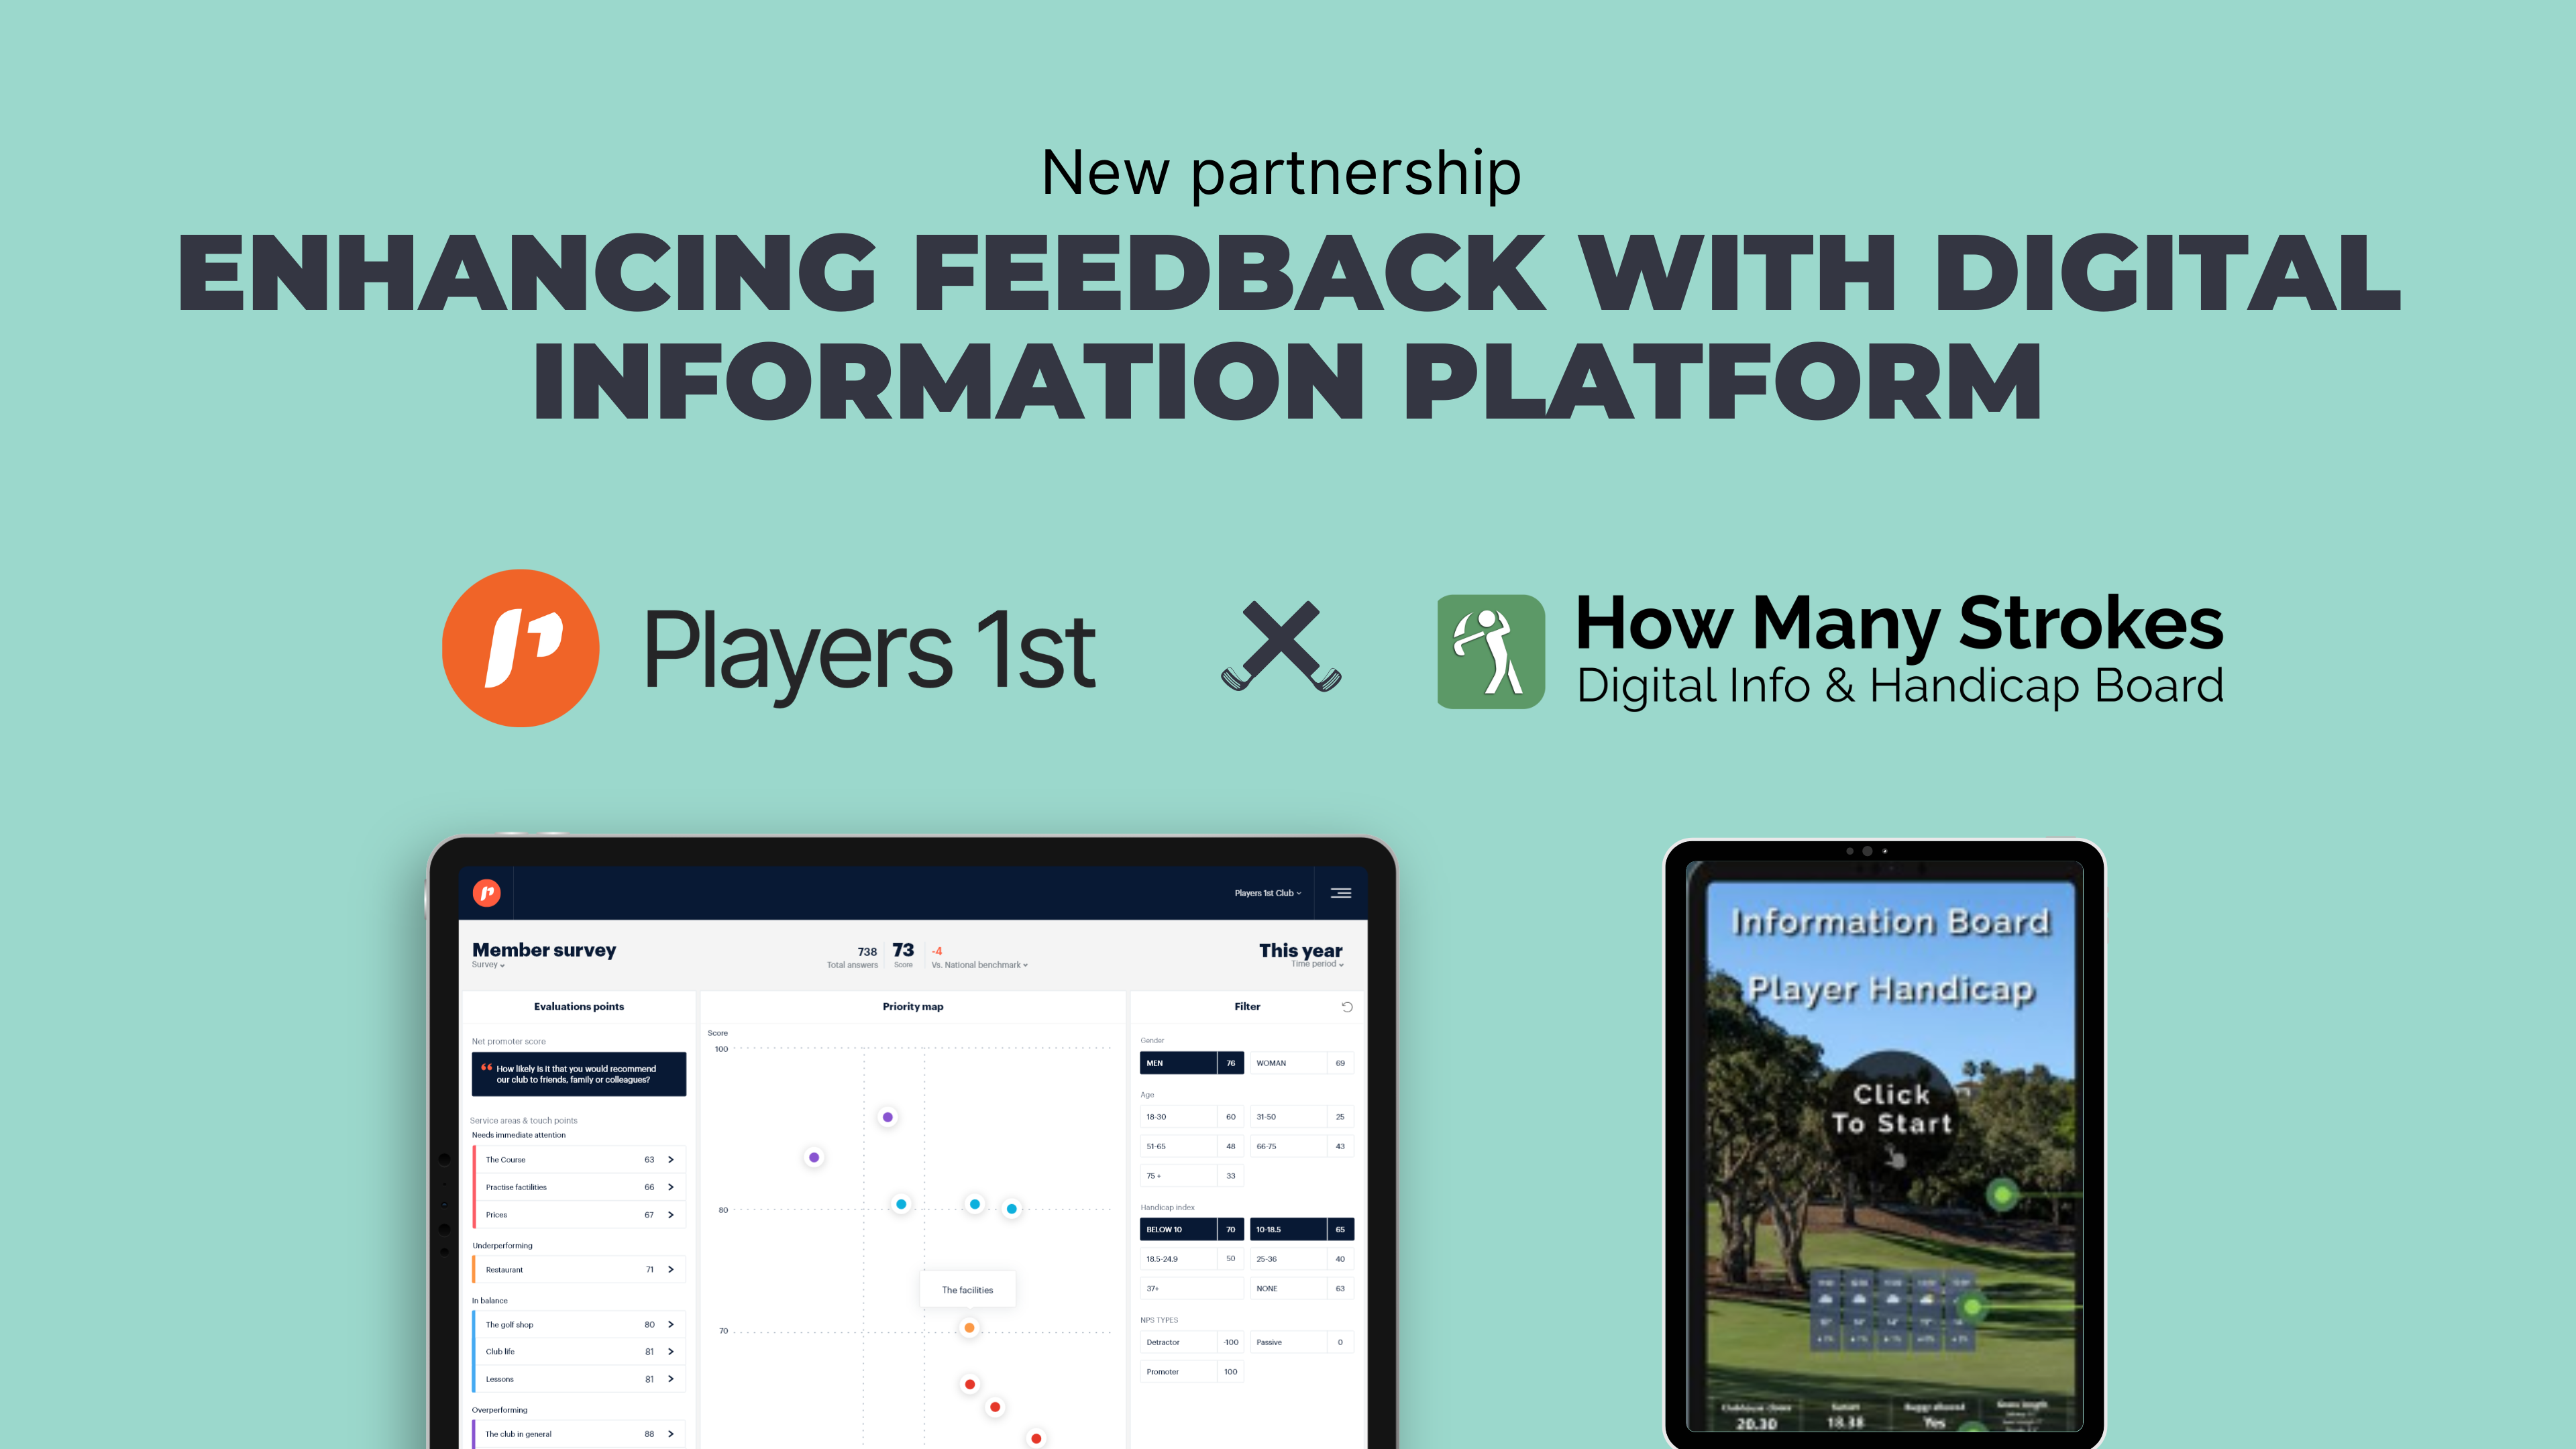 Players 1st and How Many Strokes partner to enhance feedback with digital information platform – Cover image. (1)